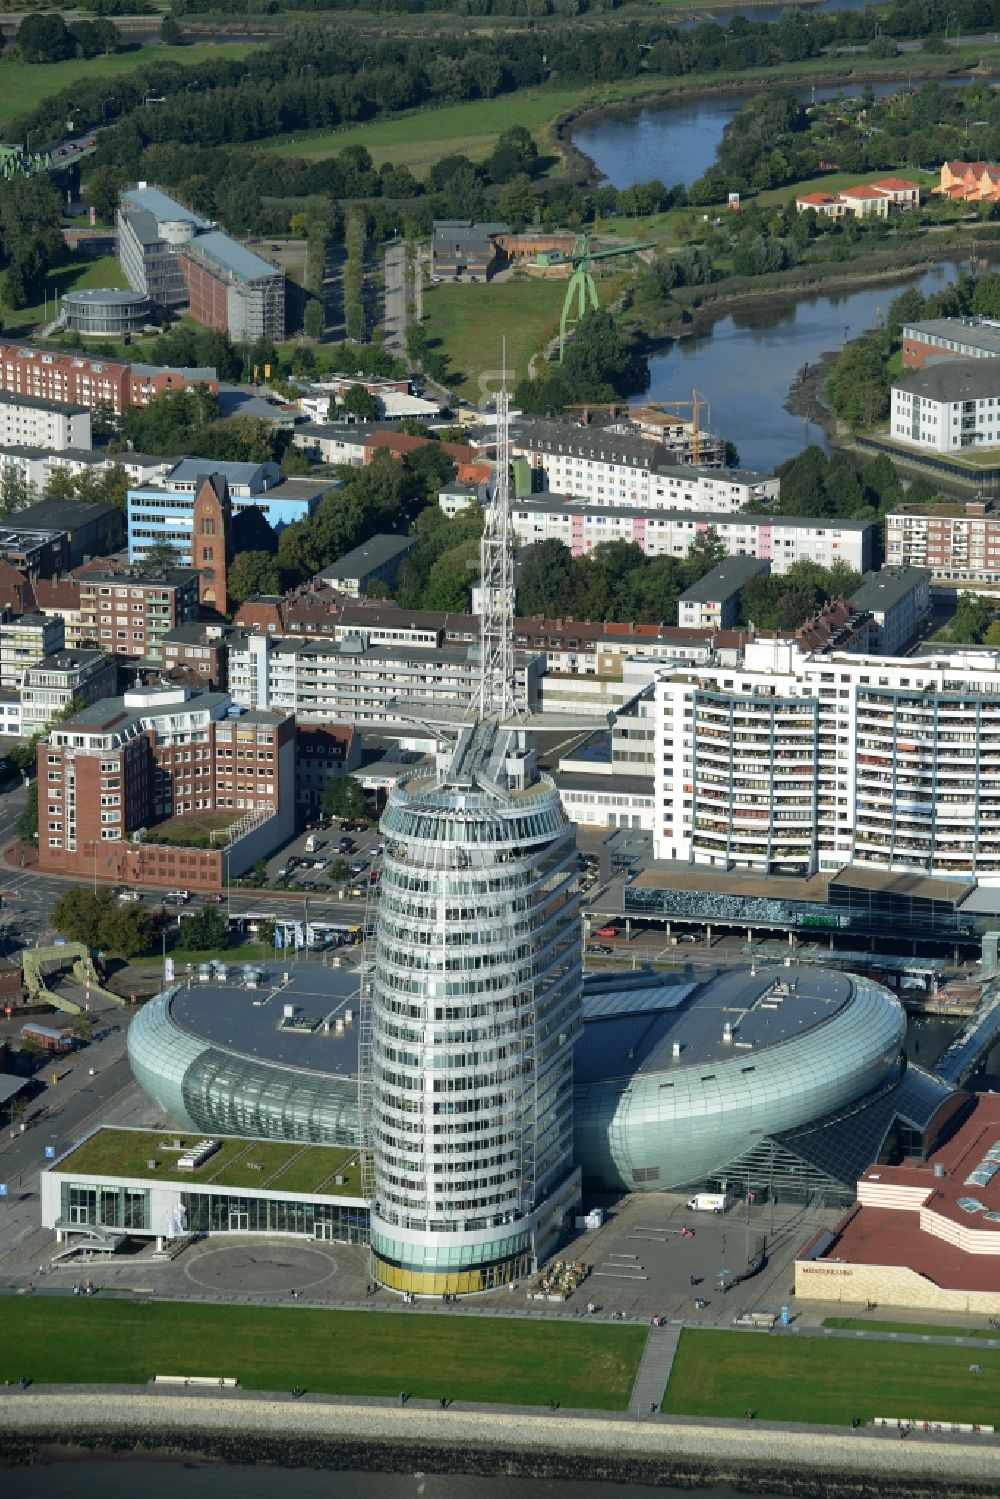 Aerial photograph Bremerhaven - Atlantic Hotel Sail City and Klimahaus in Bremerhaven in the state of Bremen. The four star hotel with its bent front is located adjacent to the exhibition space of Klimahaus Bremerhaven 8° Ost and on the riverbank of the Weser